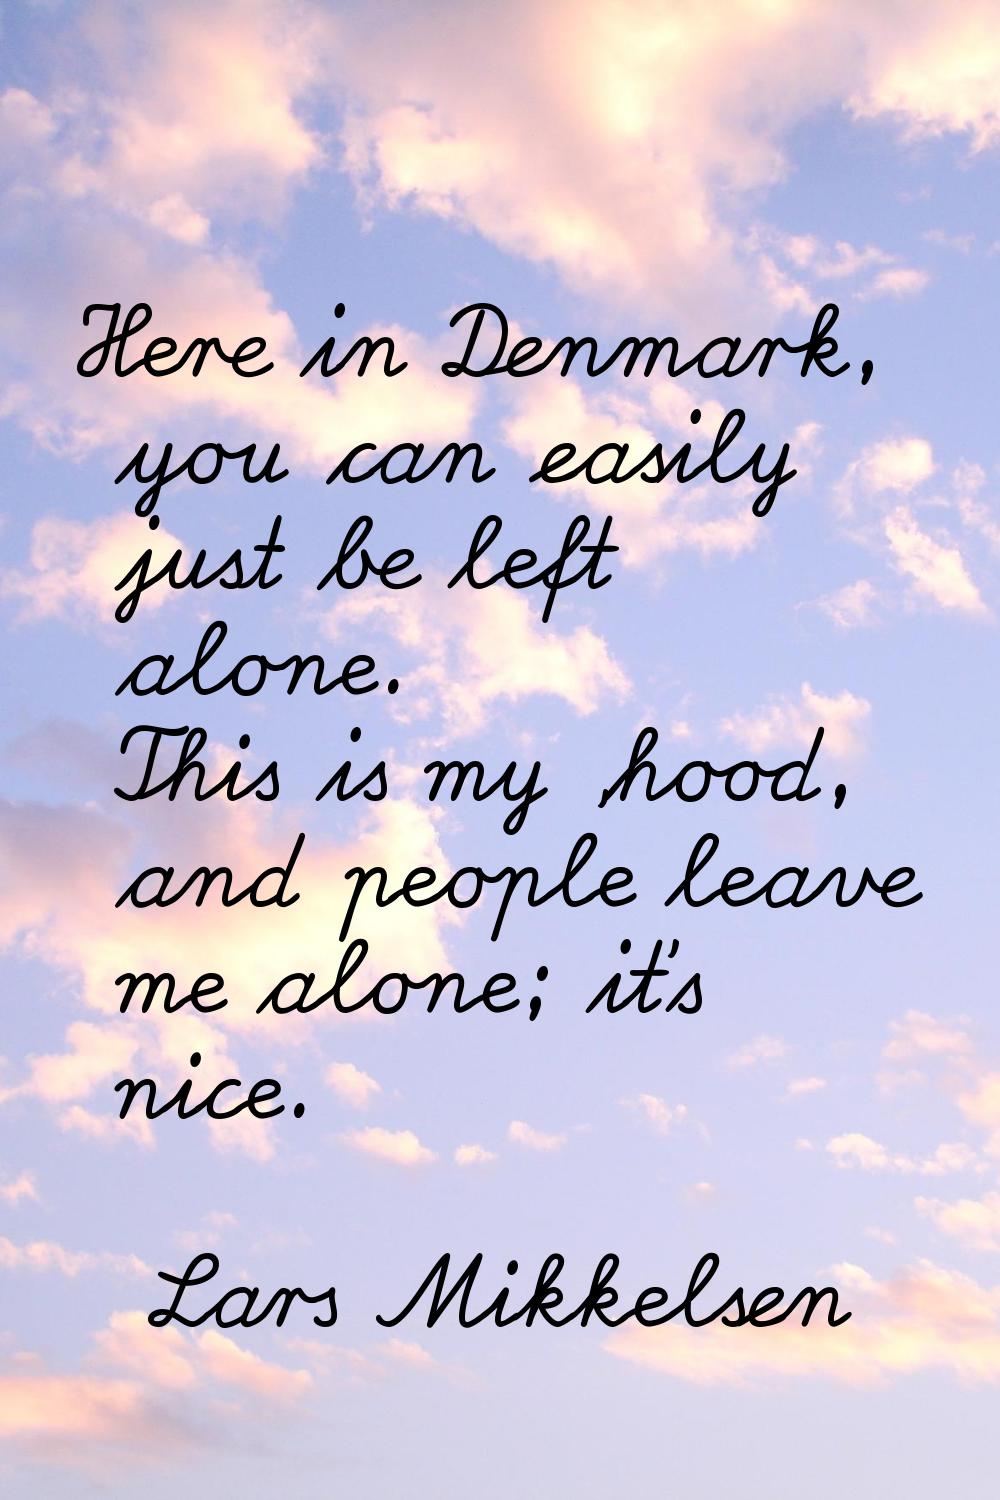 Here in Denmark, you can easily just be left alone. This is my 'hood, and people leave me alone; it